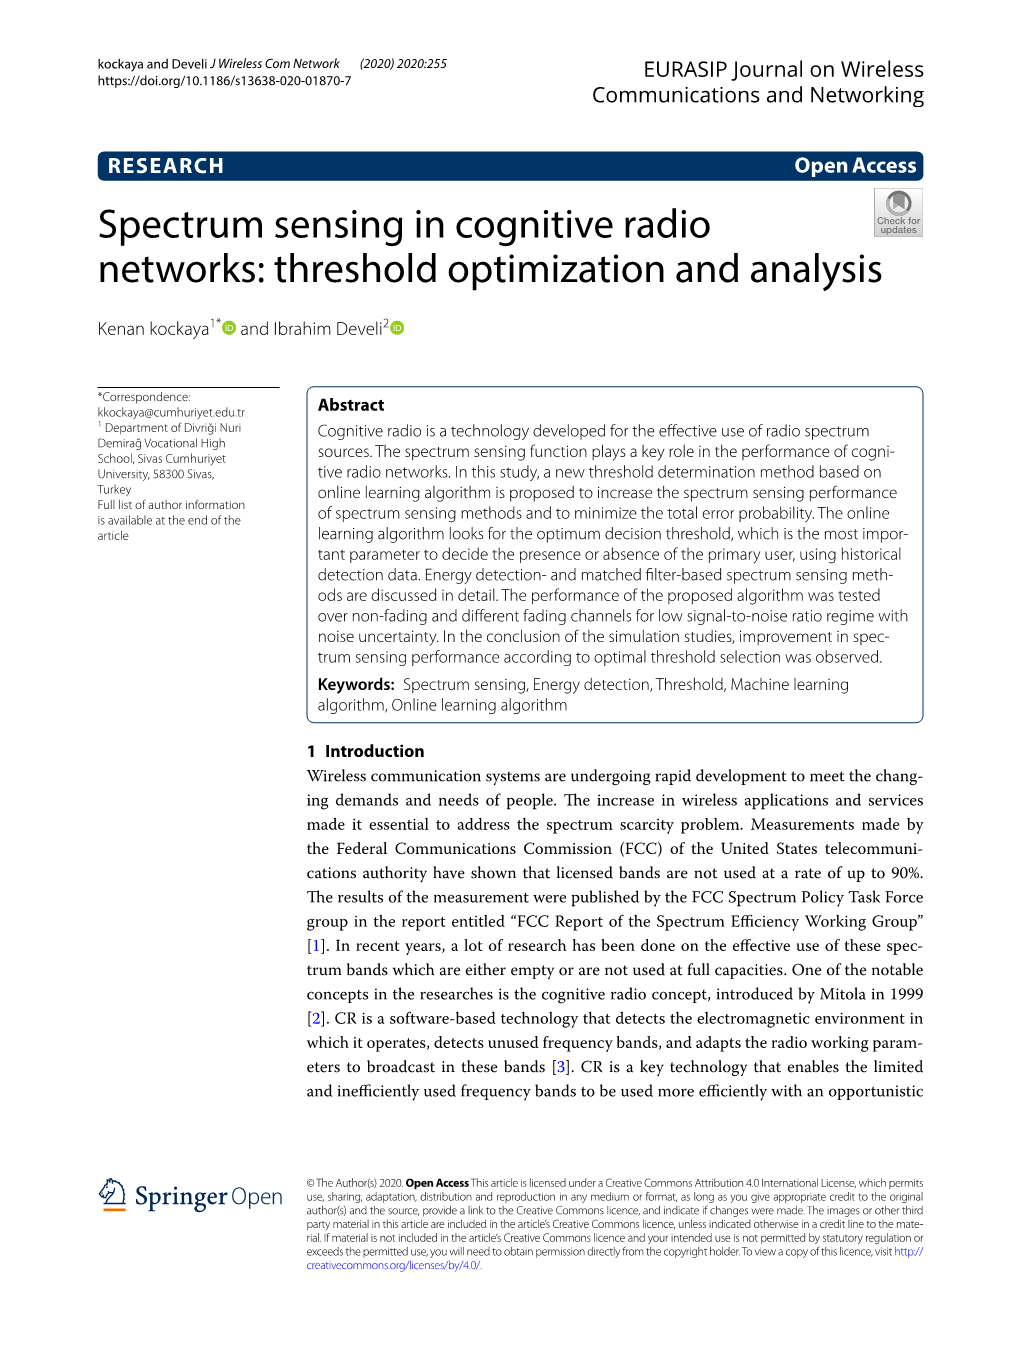 Spectrum Sensing in Cognitive Radio Networks: Threshold Optimization and Analysis